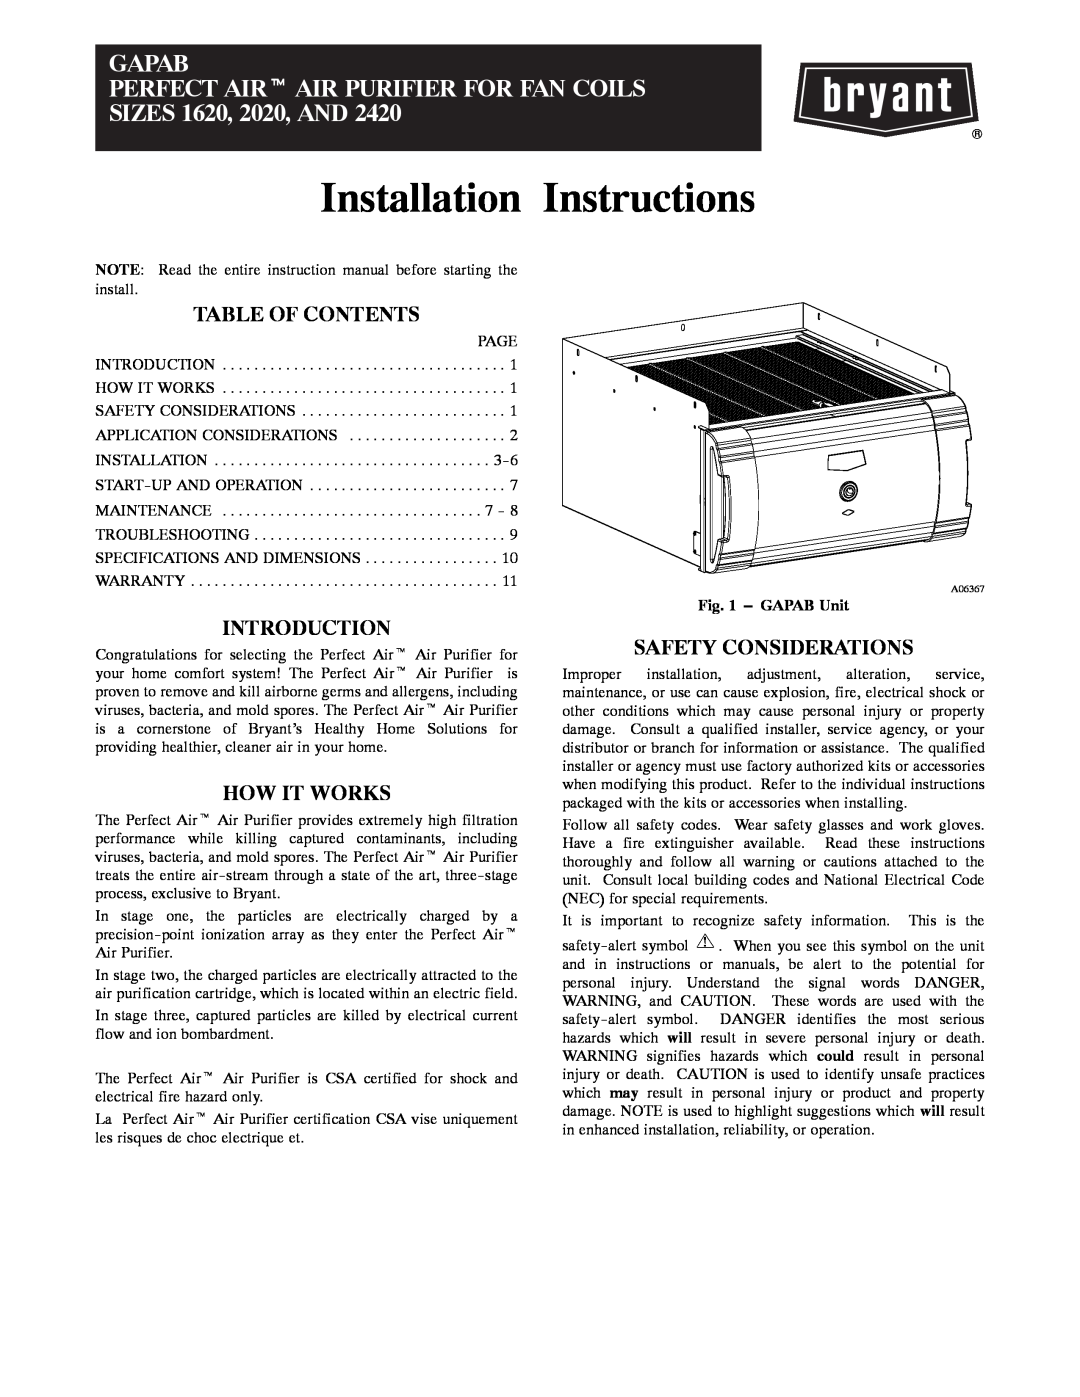 Bryant 1620 installation instructions Table Of Contents, Introduction, How It Works, Safety Considerations, GAPAB Unit 